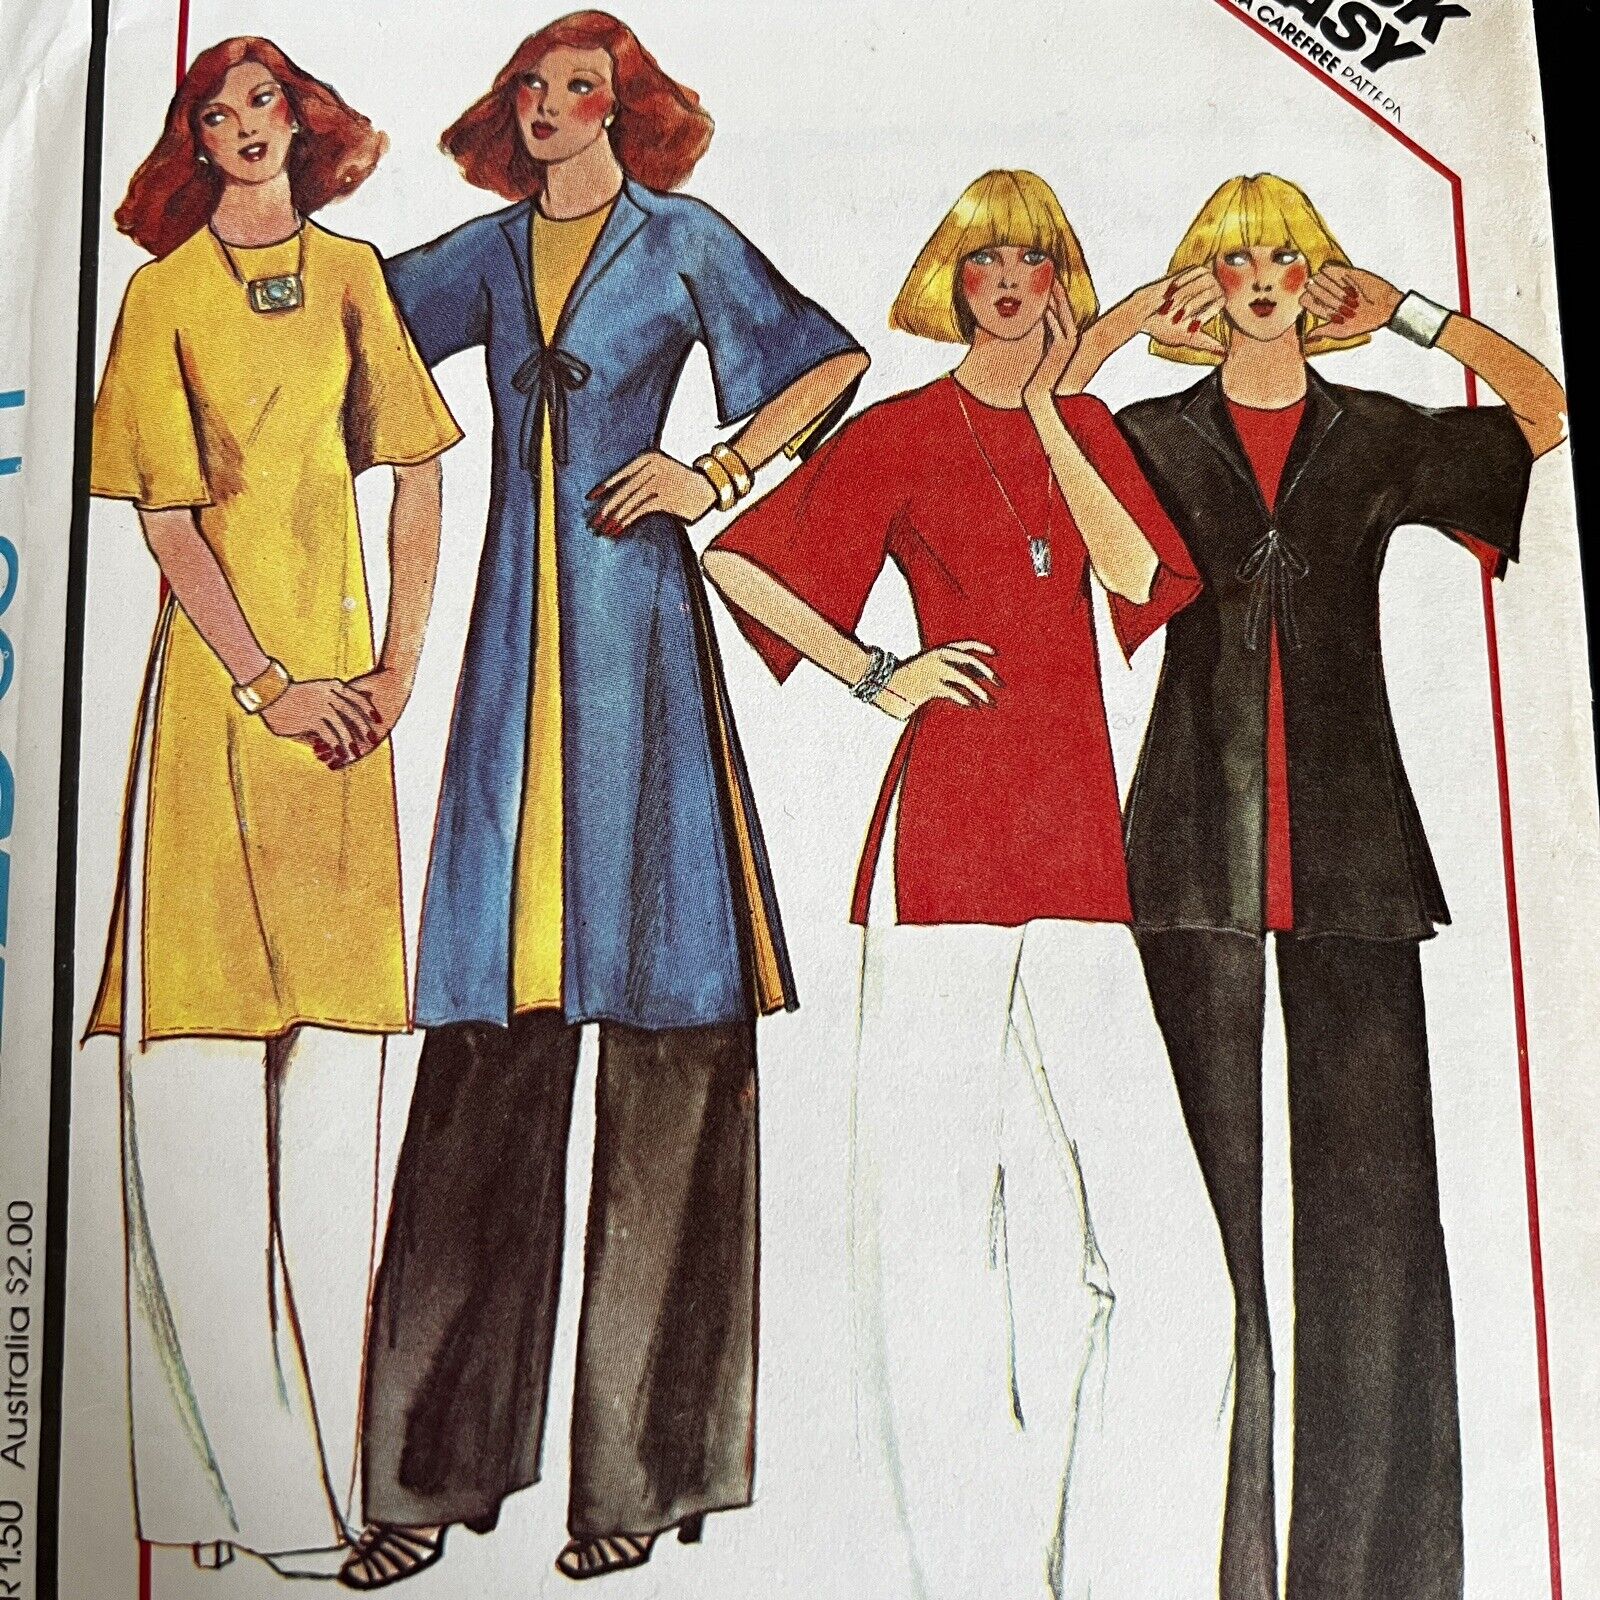 Vintage 1970s McCalls 5341 Jacket Tunic or Top Pants Sewing Pattern Small UNCUT